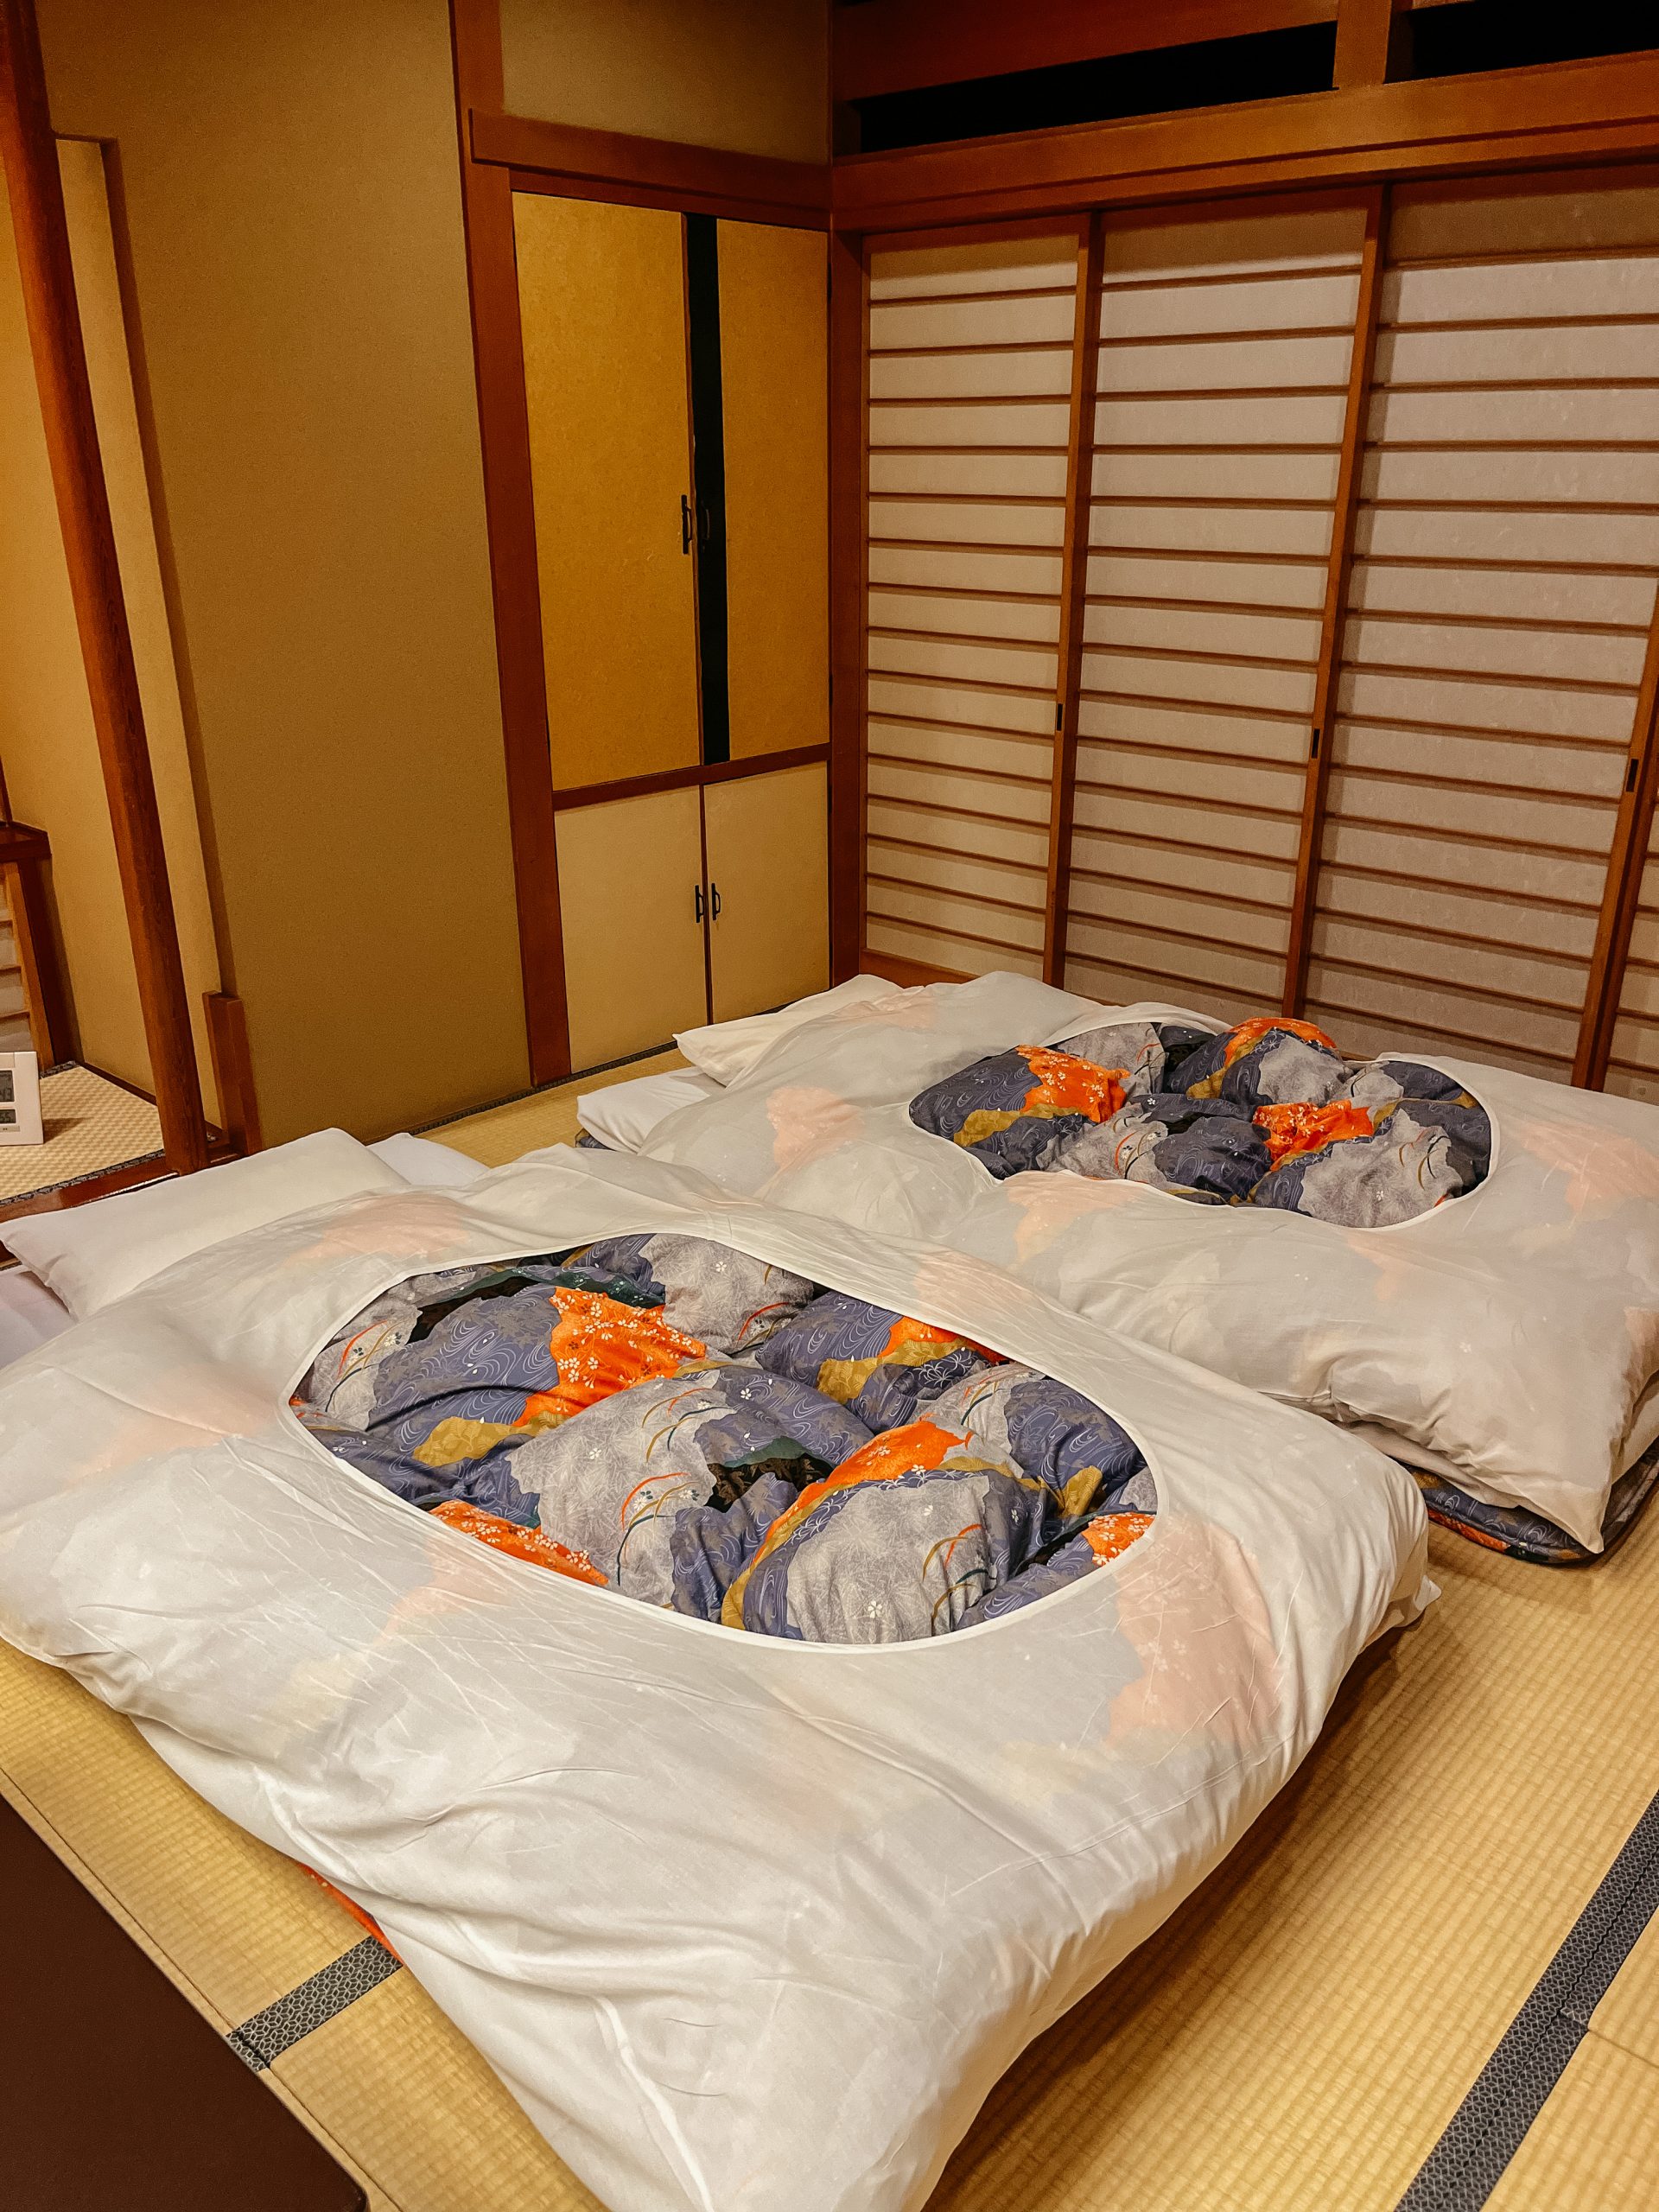 Futons with Japanese fluffy duvets on tatami